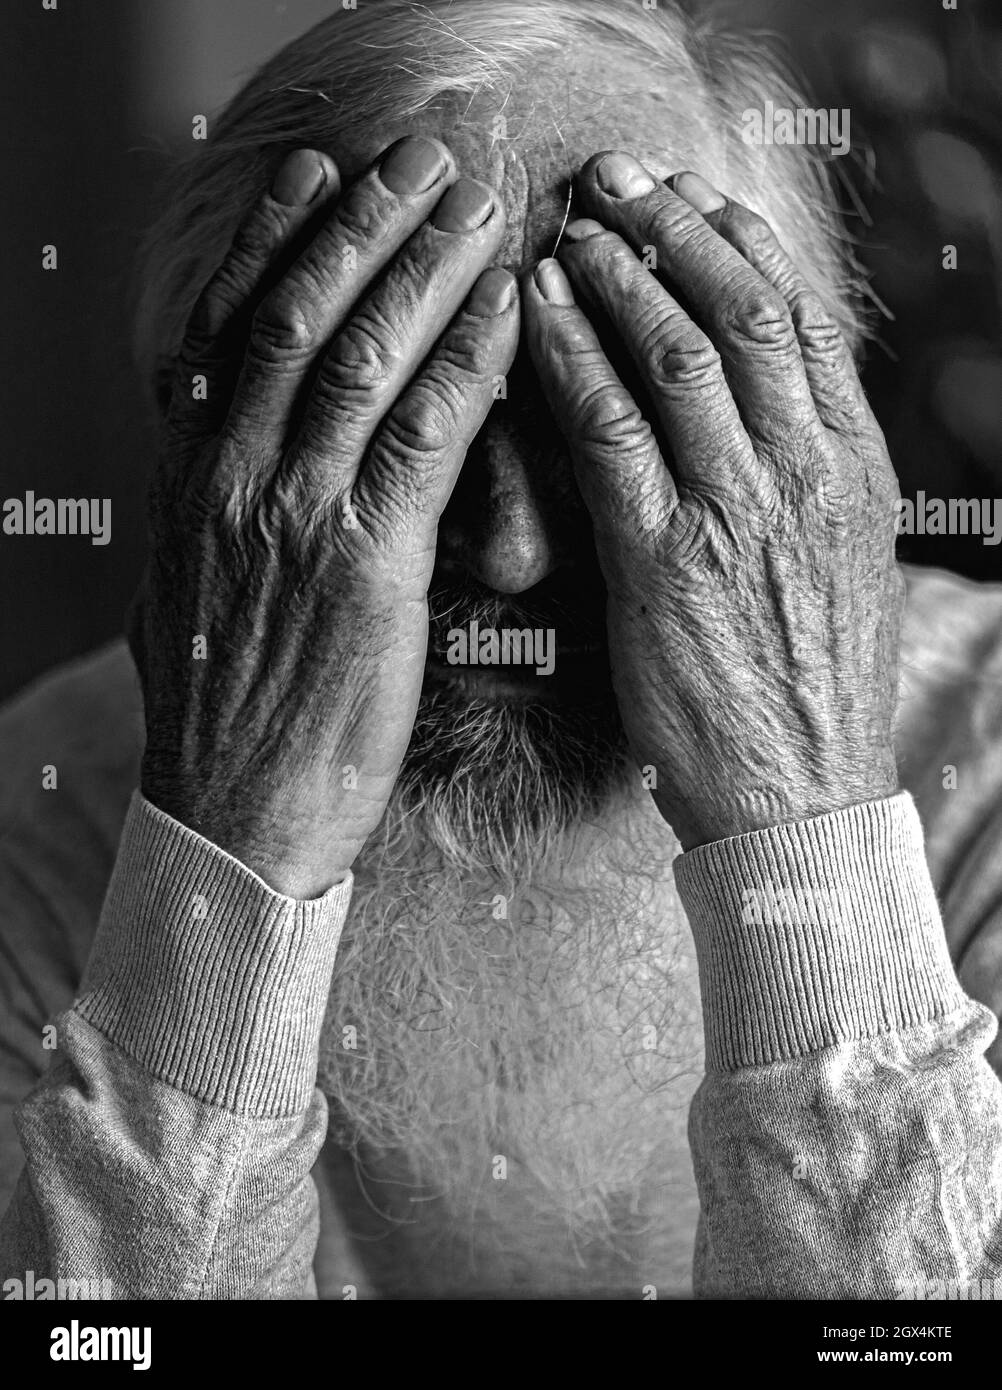 A tired, broken, resigned, preoccupied elderly man sits in front of a laptop, computer and covers his face with his hand. Stock Photo